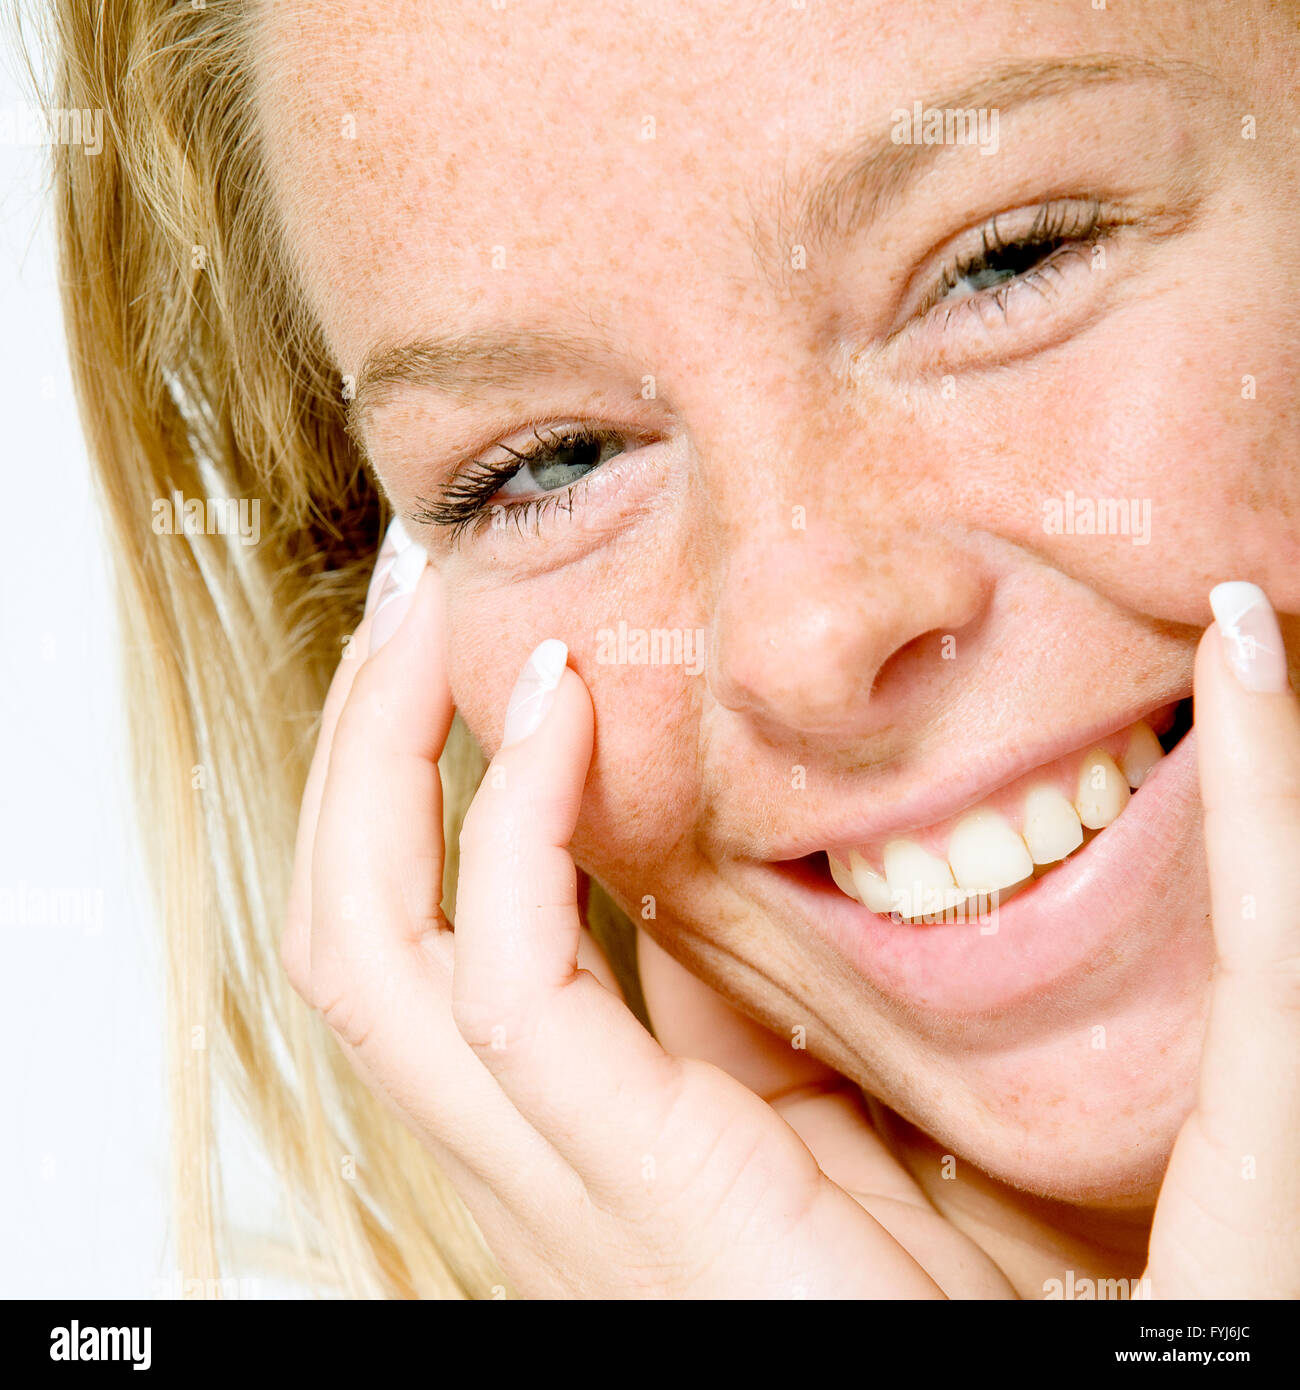 A big toothy smile Stock Photo